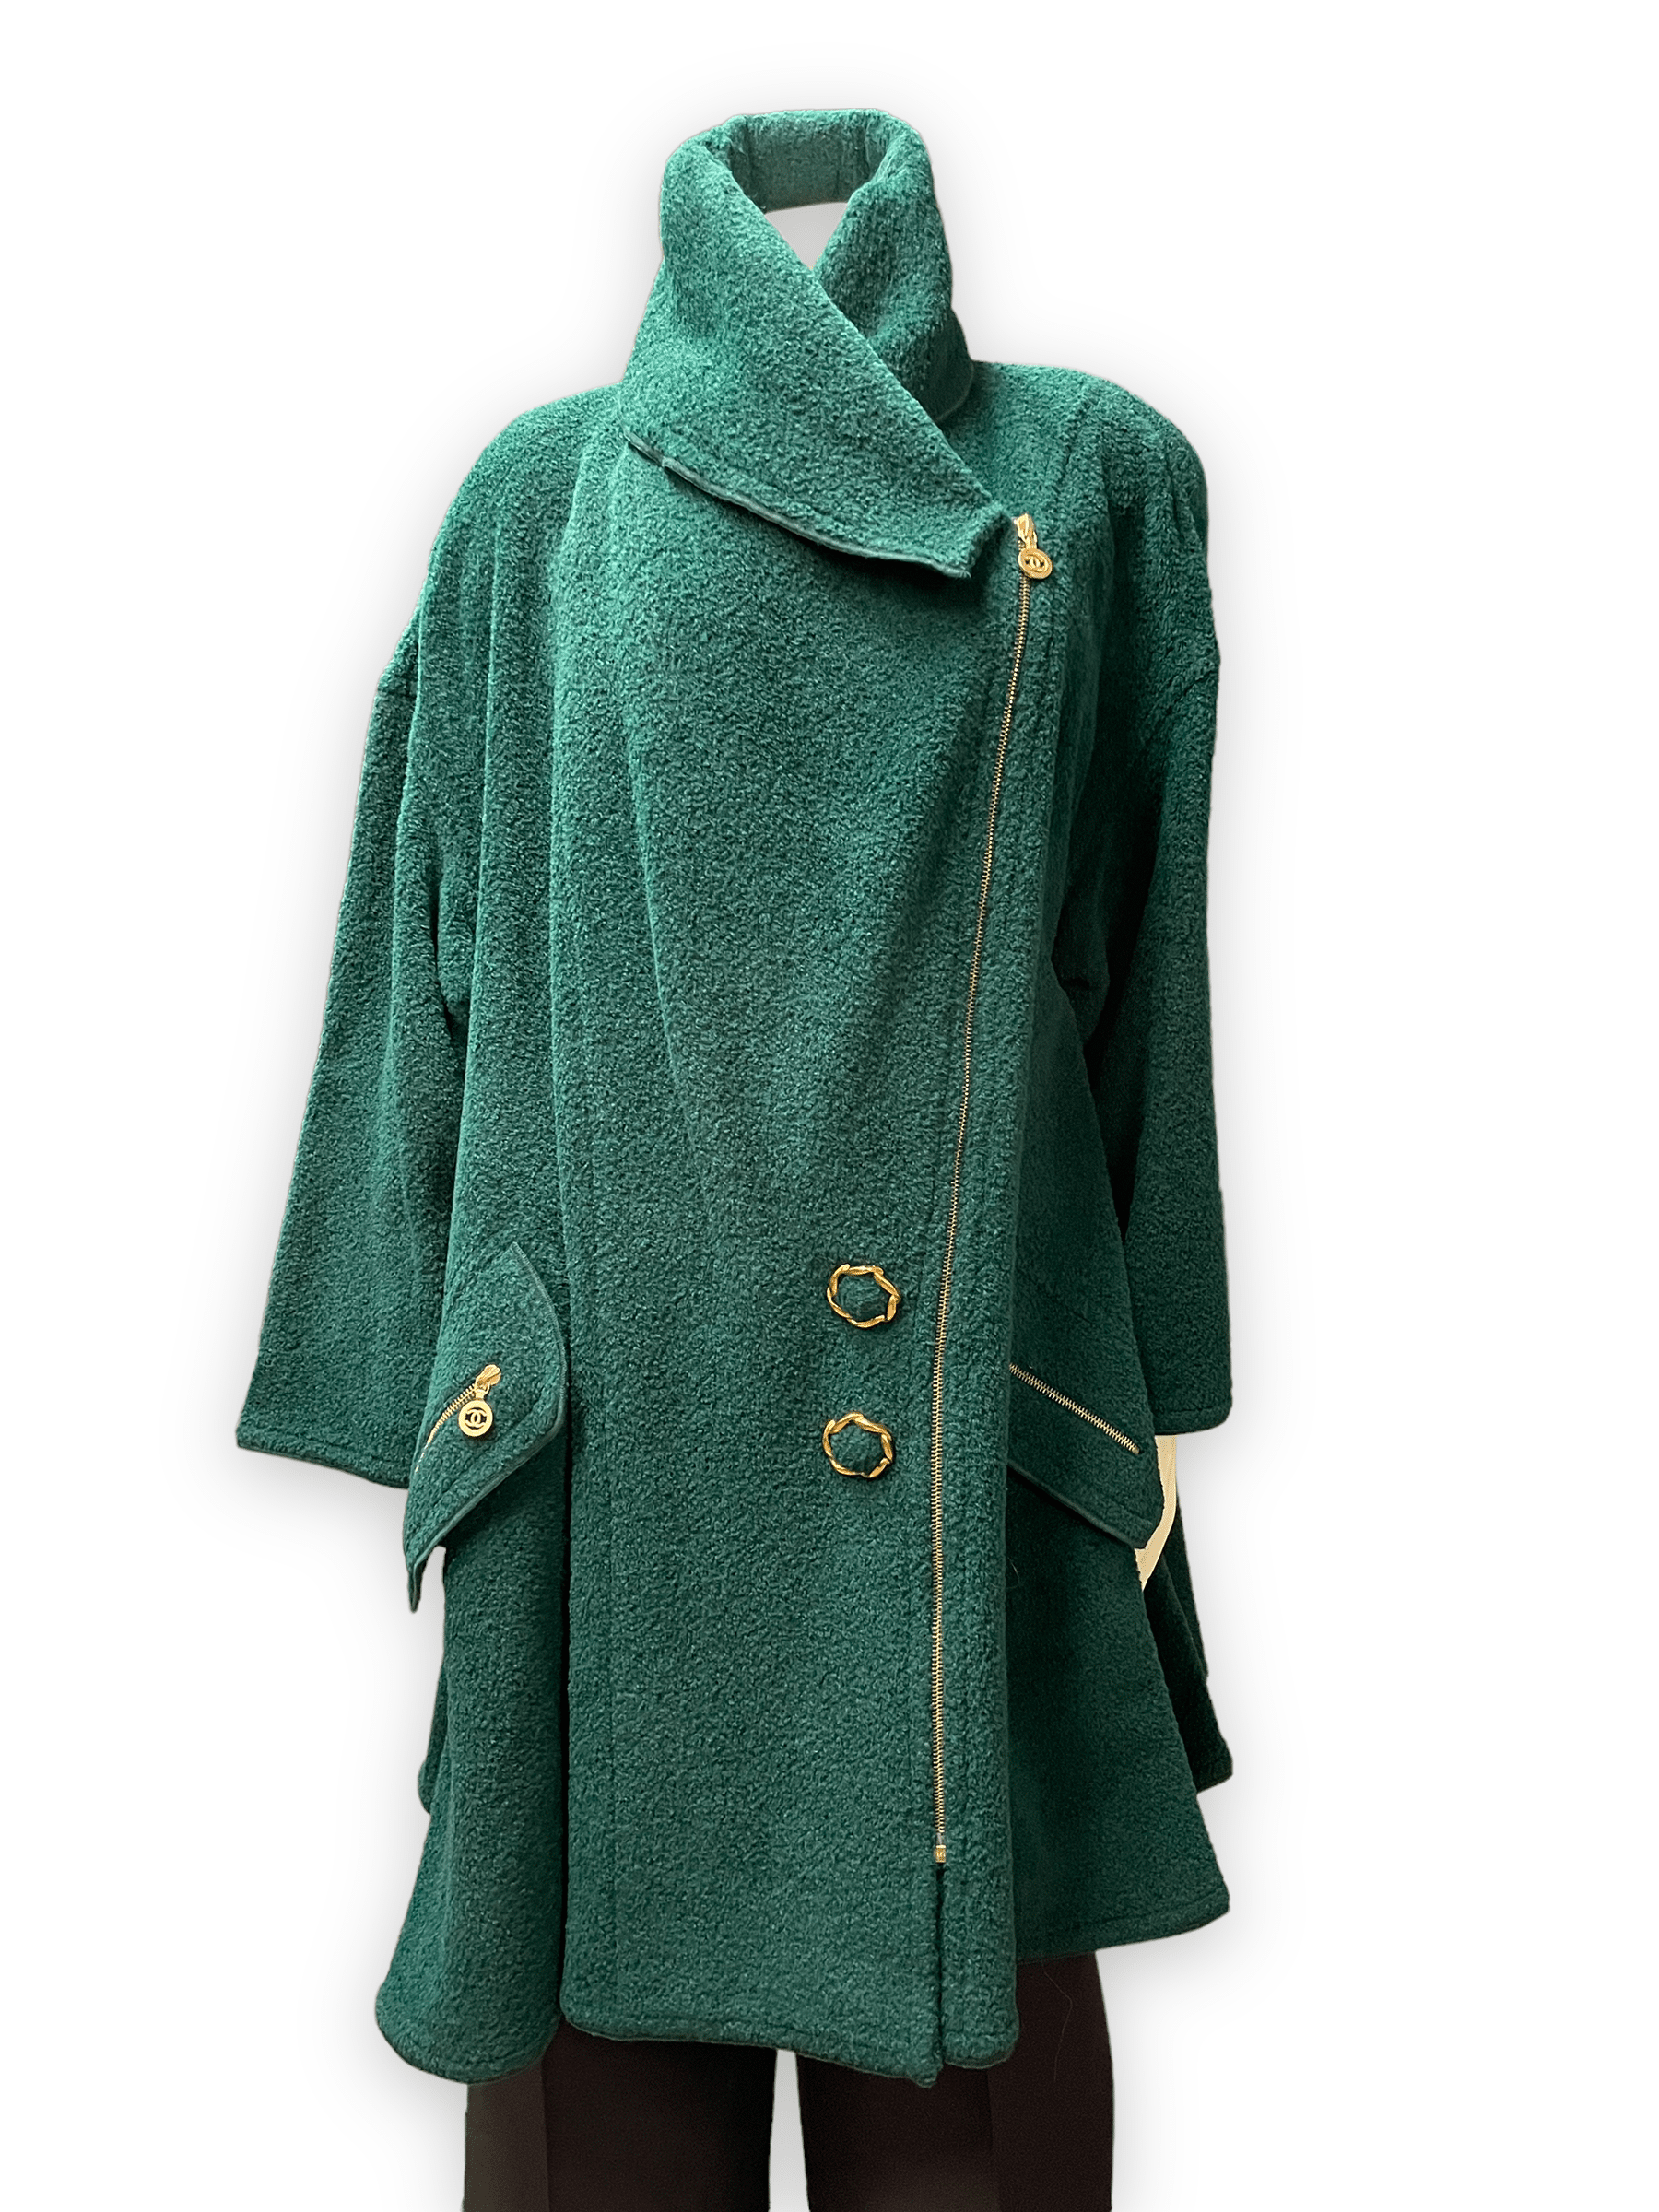 Vintage Chanel Boutique Fluffy Green Coat with Golden Accents